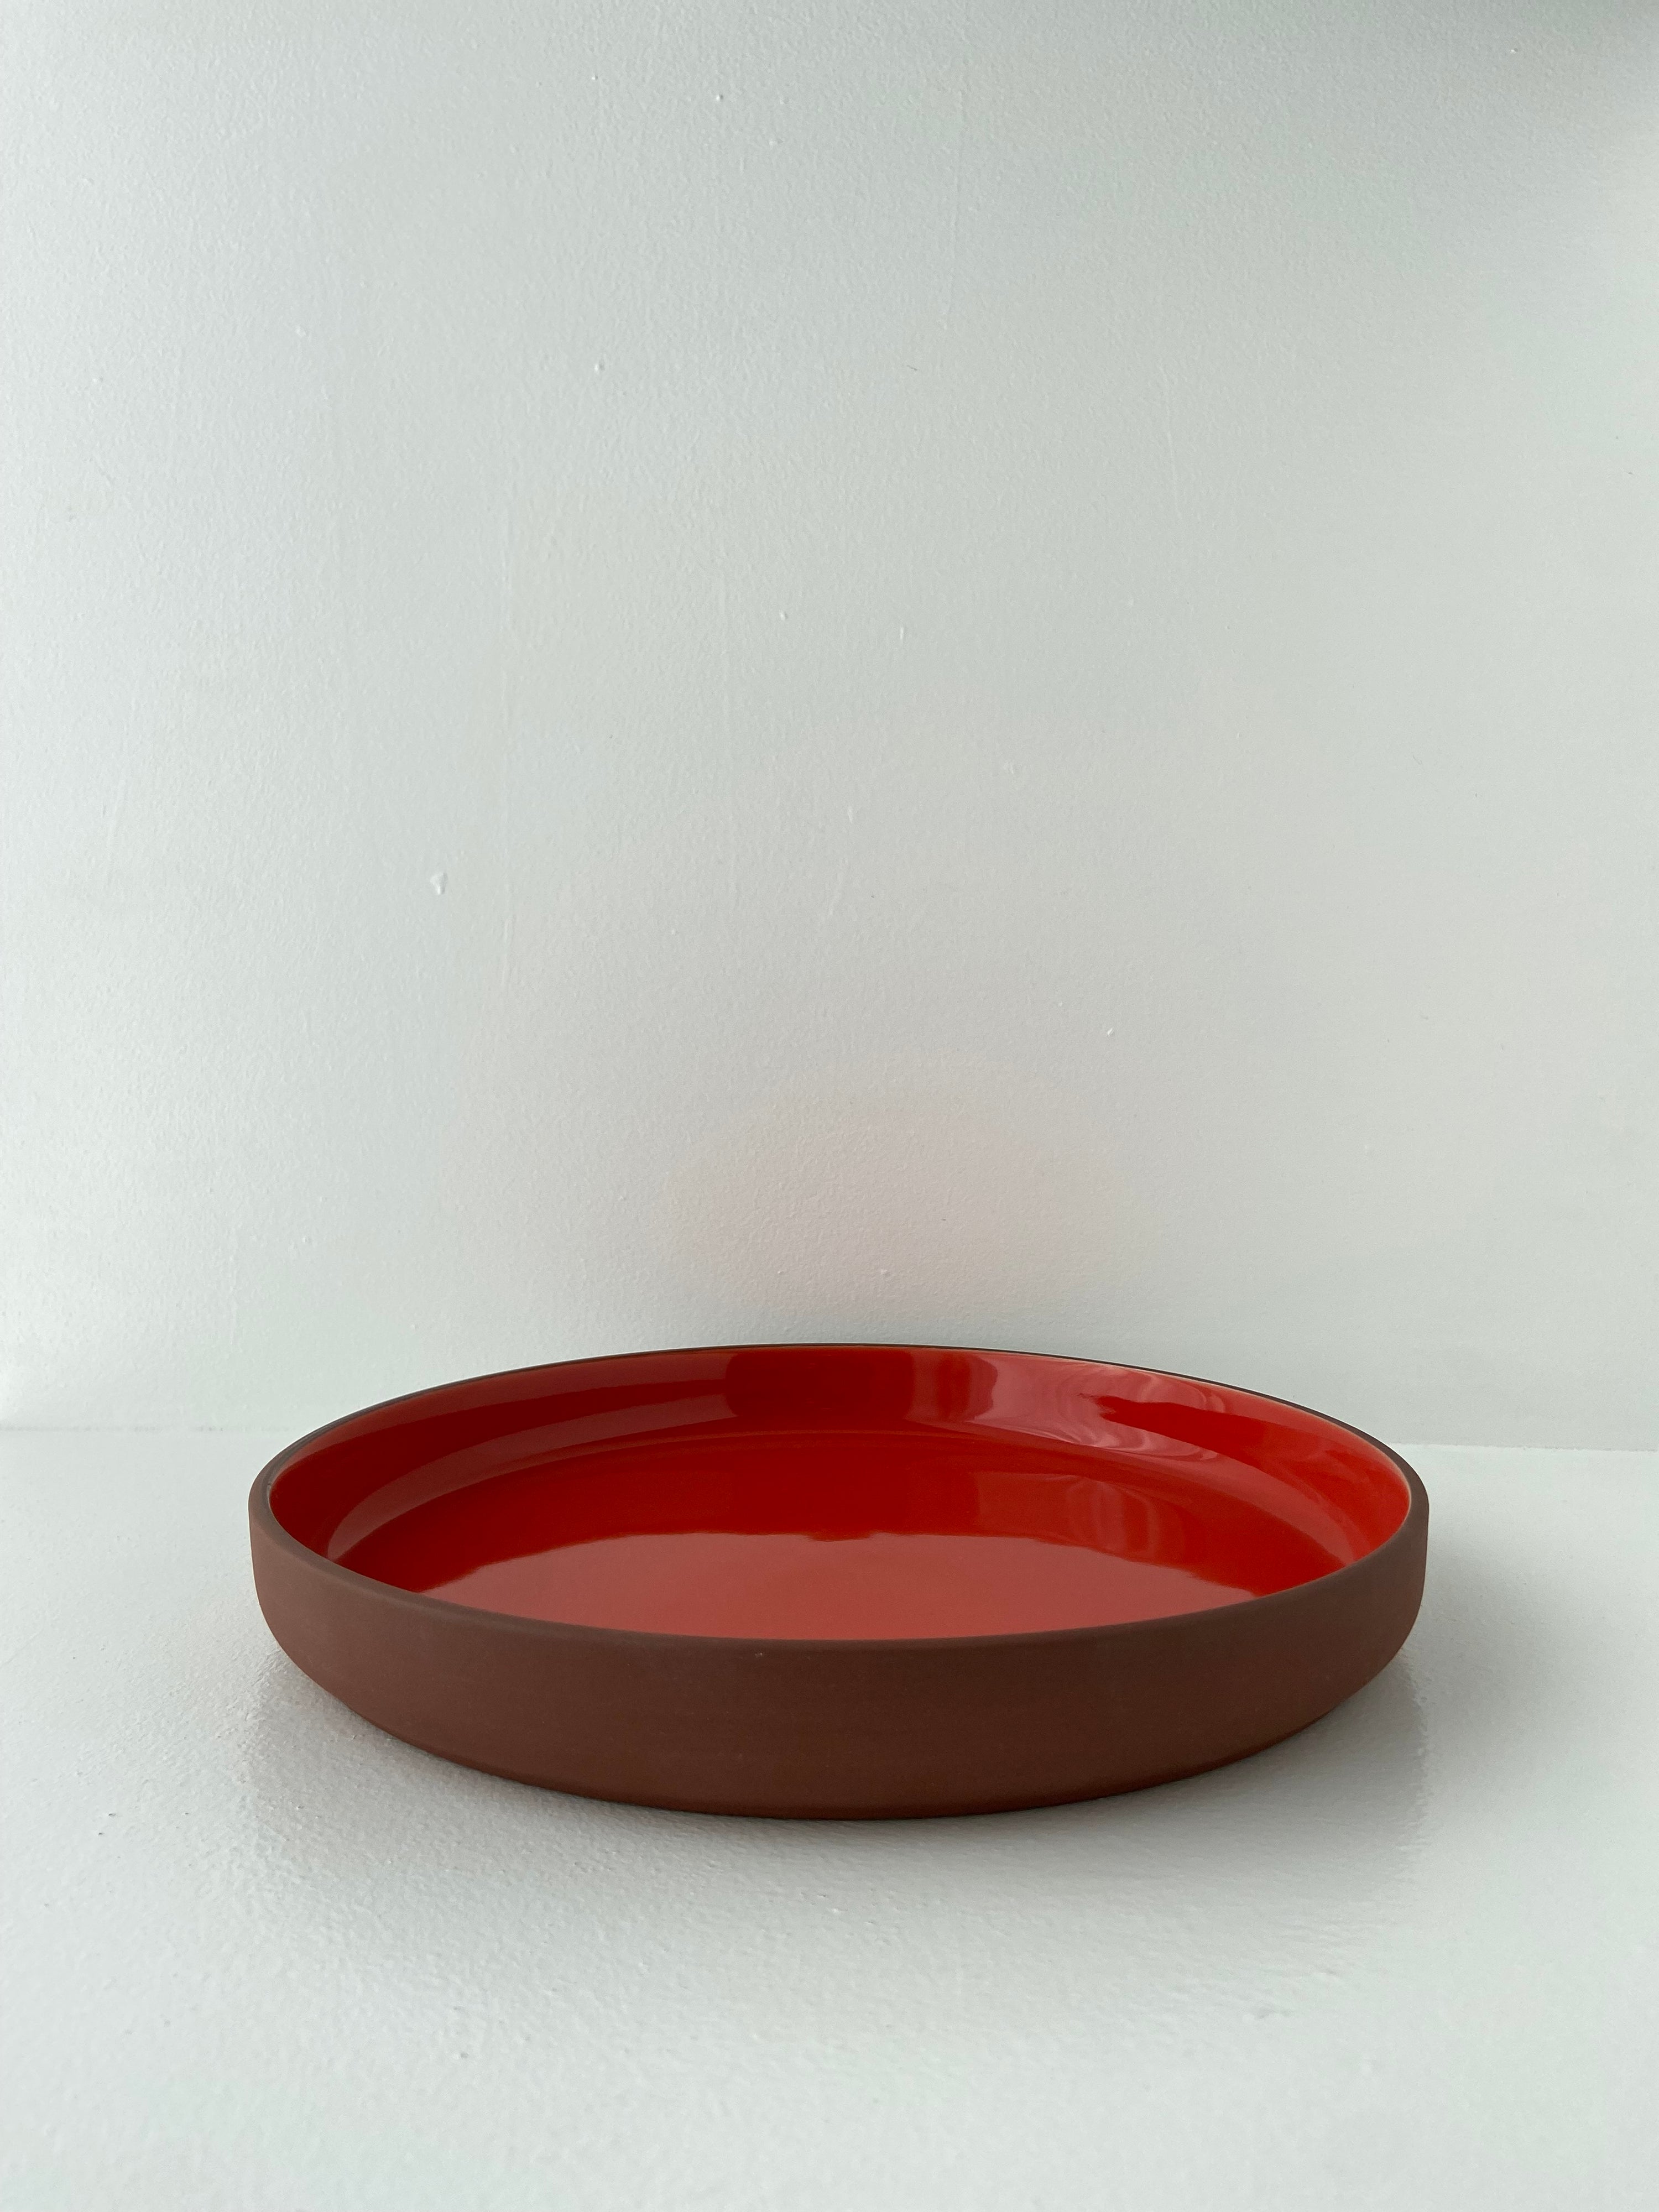 Clayware, Serving Dish, Large, Low, Clay Terracotta/Glaze Red